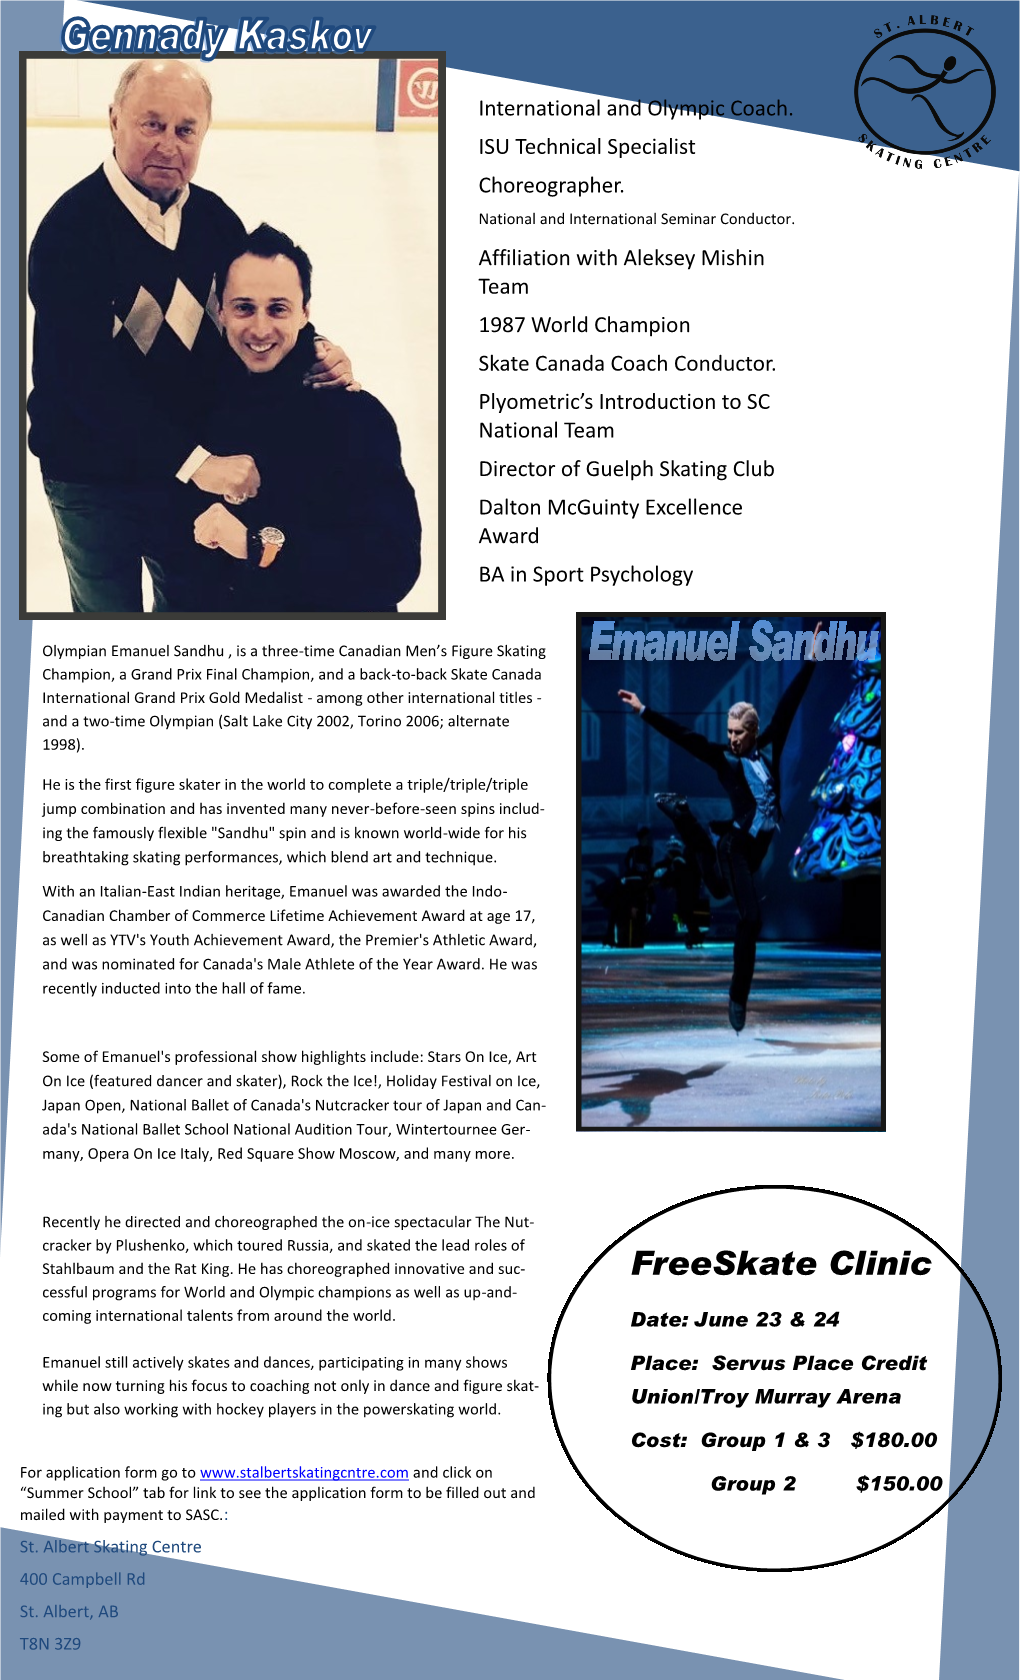 Freeskate Clinic Cessful Programs for World and Olympic Champions As Well As Up-And- Coming International Talents from Around the World